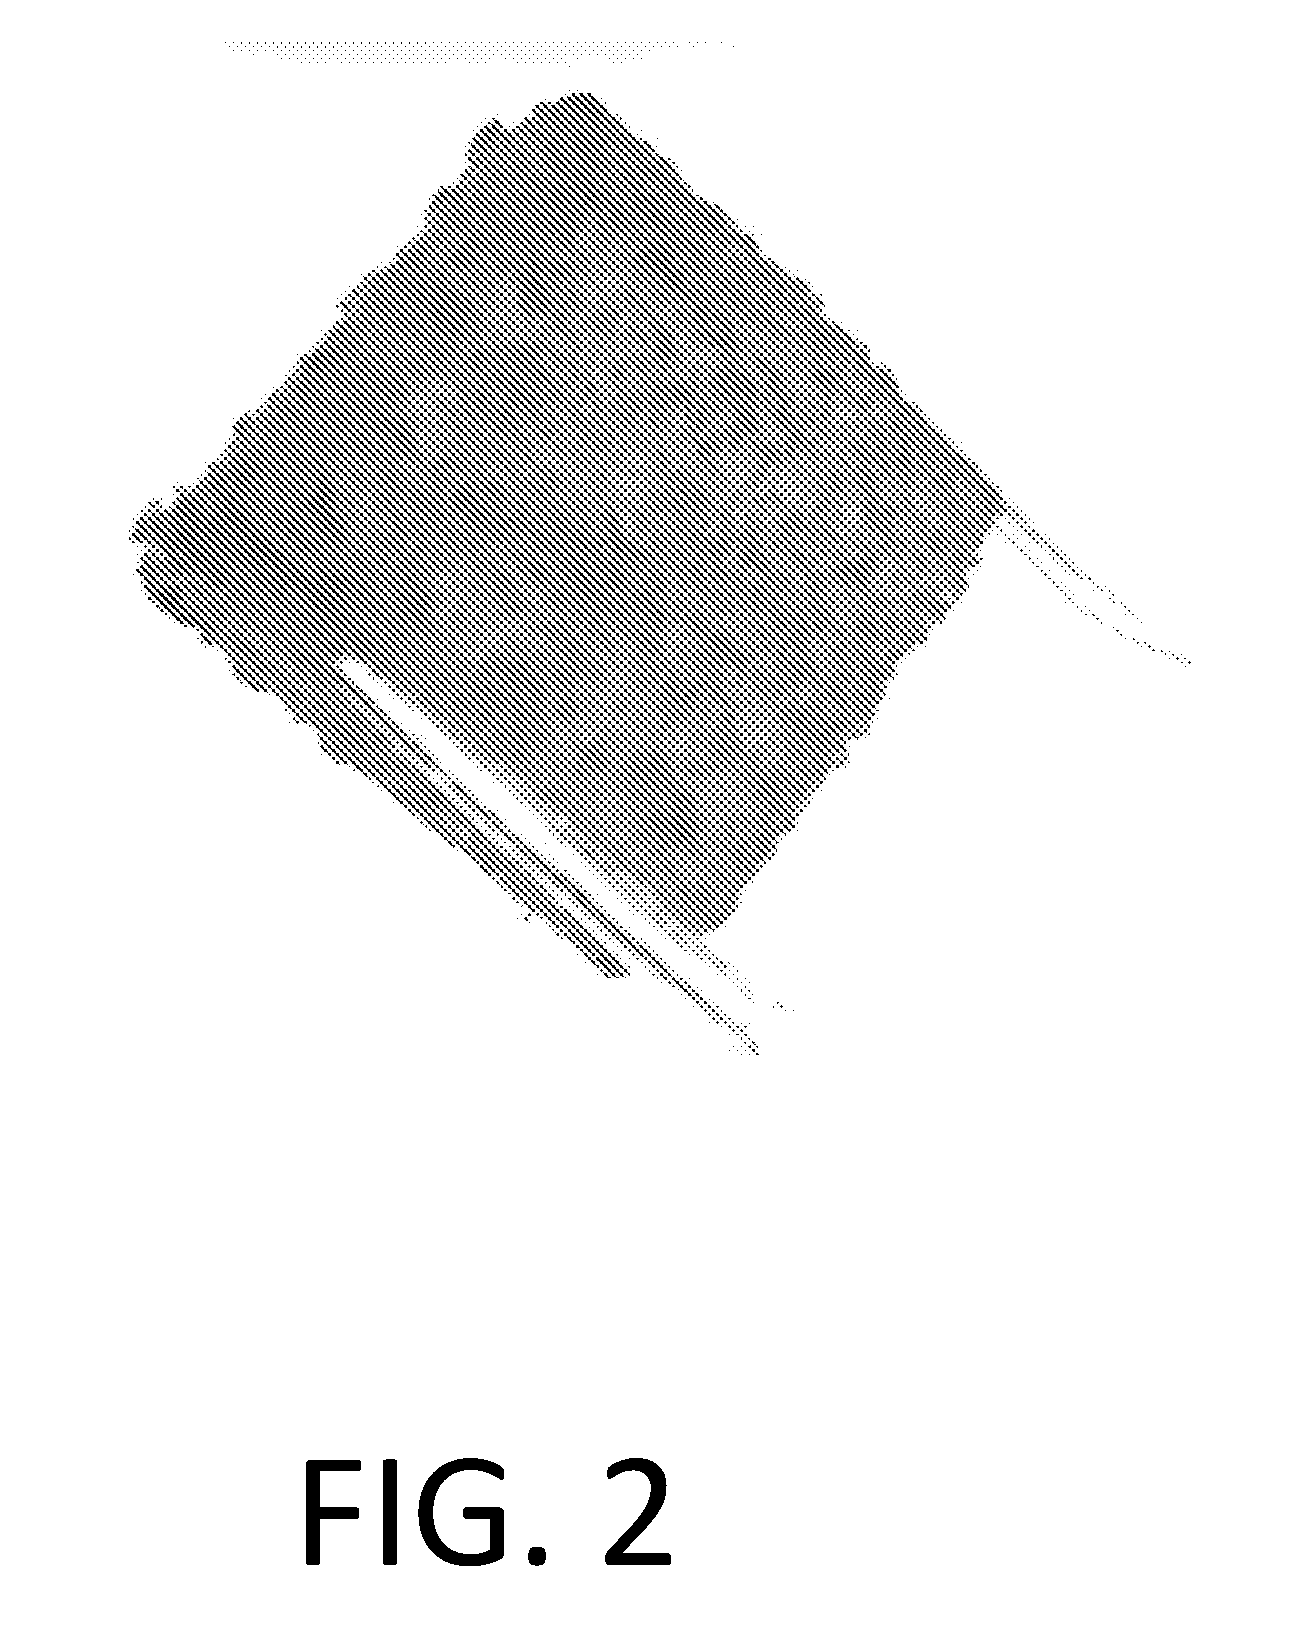 Crosslinkable 3D printed biomaterial-based implants and methods of manufacture thereof